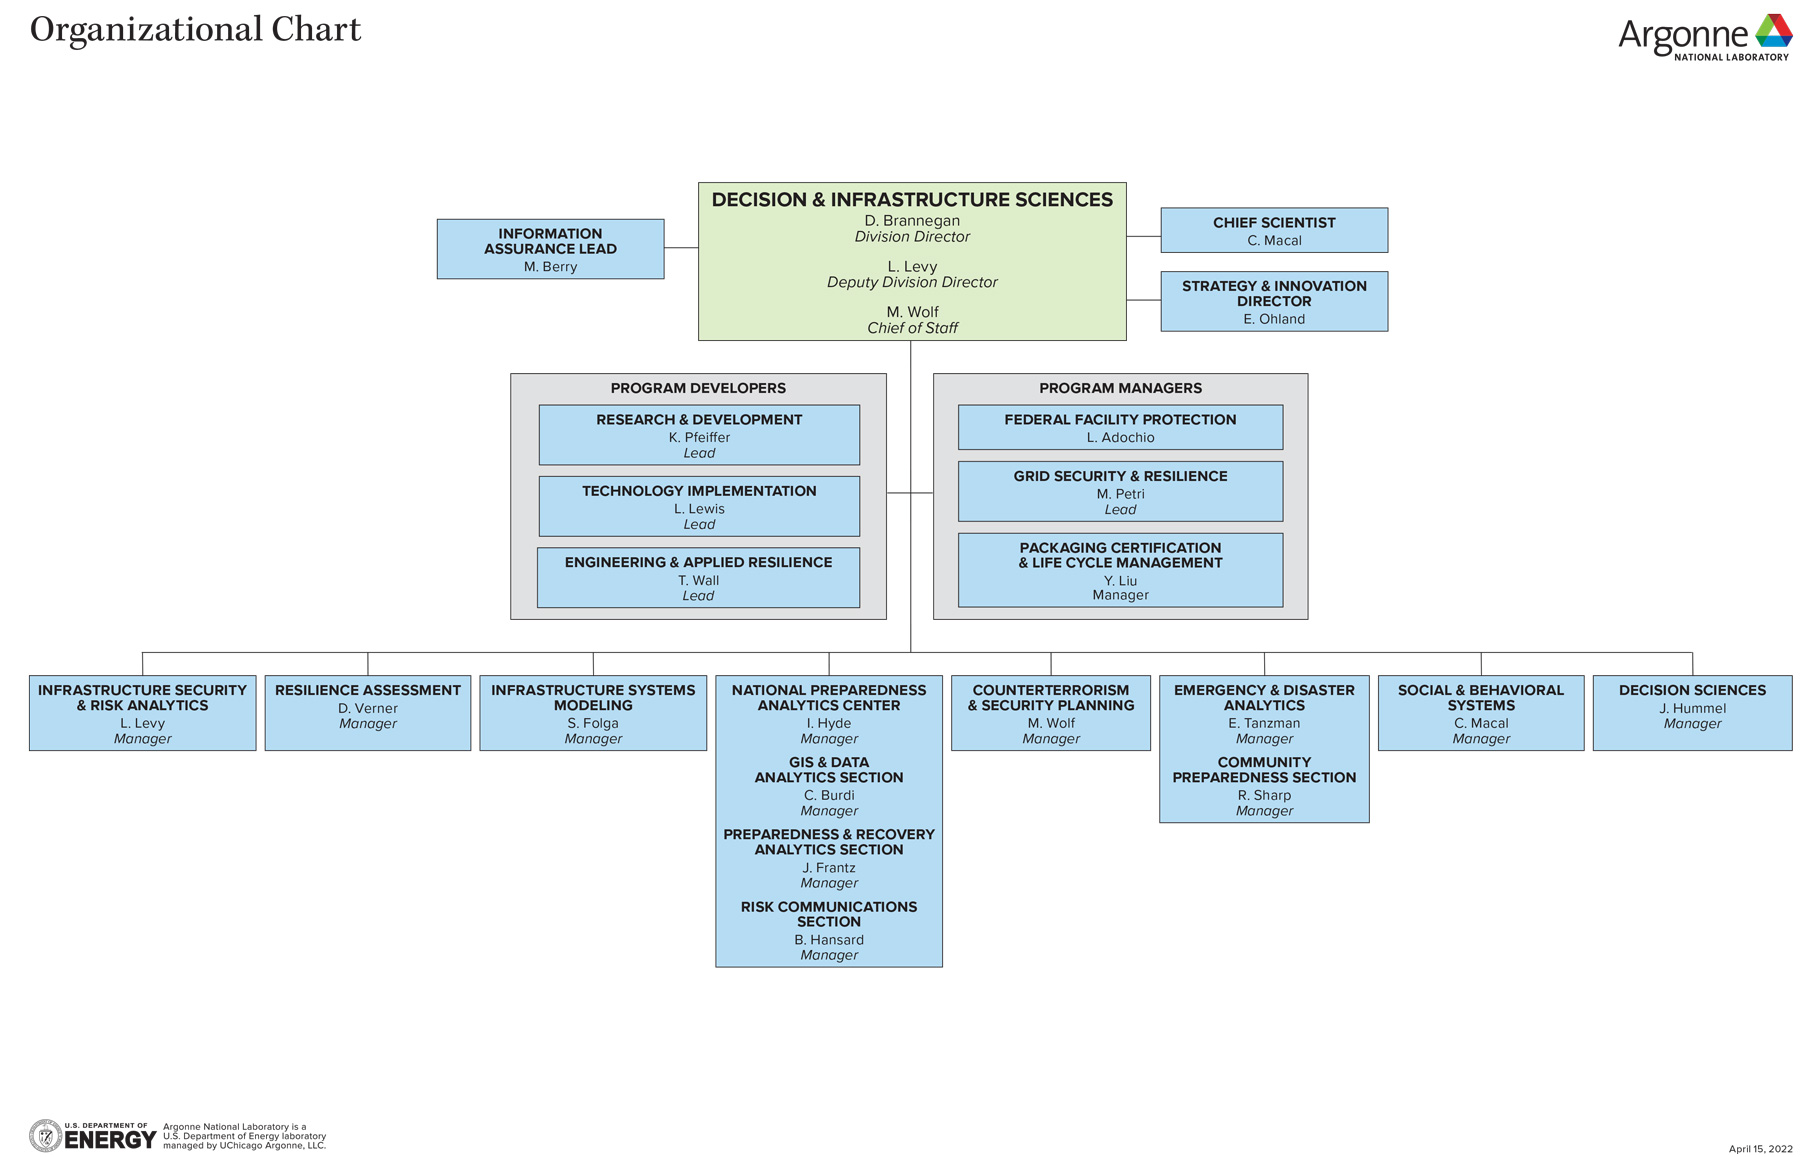 Organization chart of the Argonne Decision & Infrastructure Sciences division